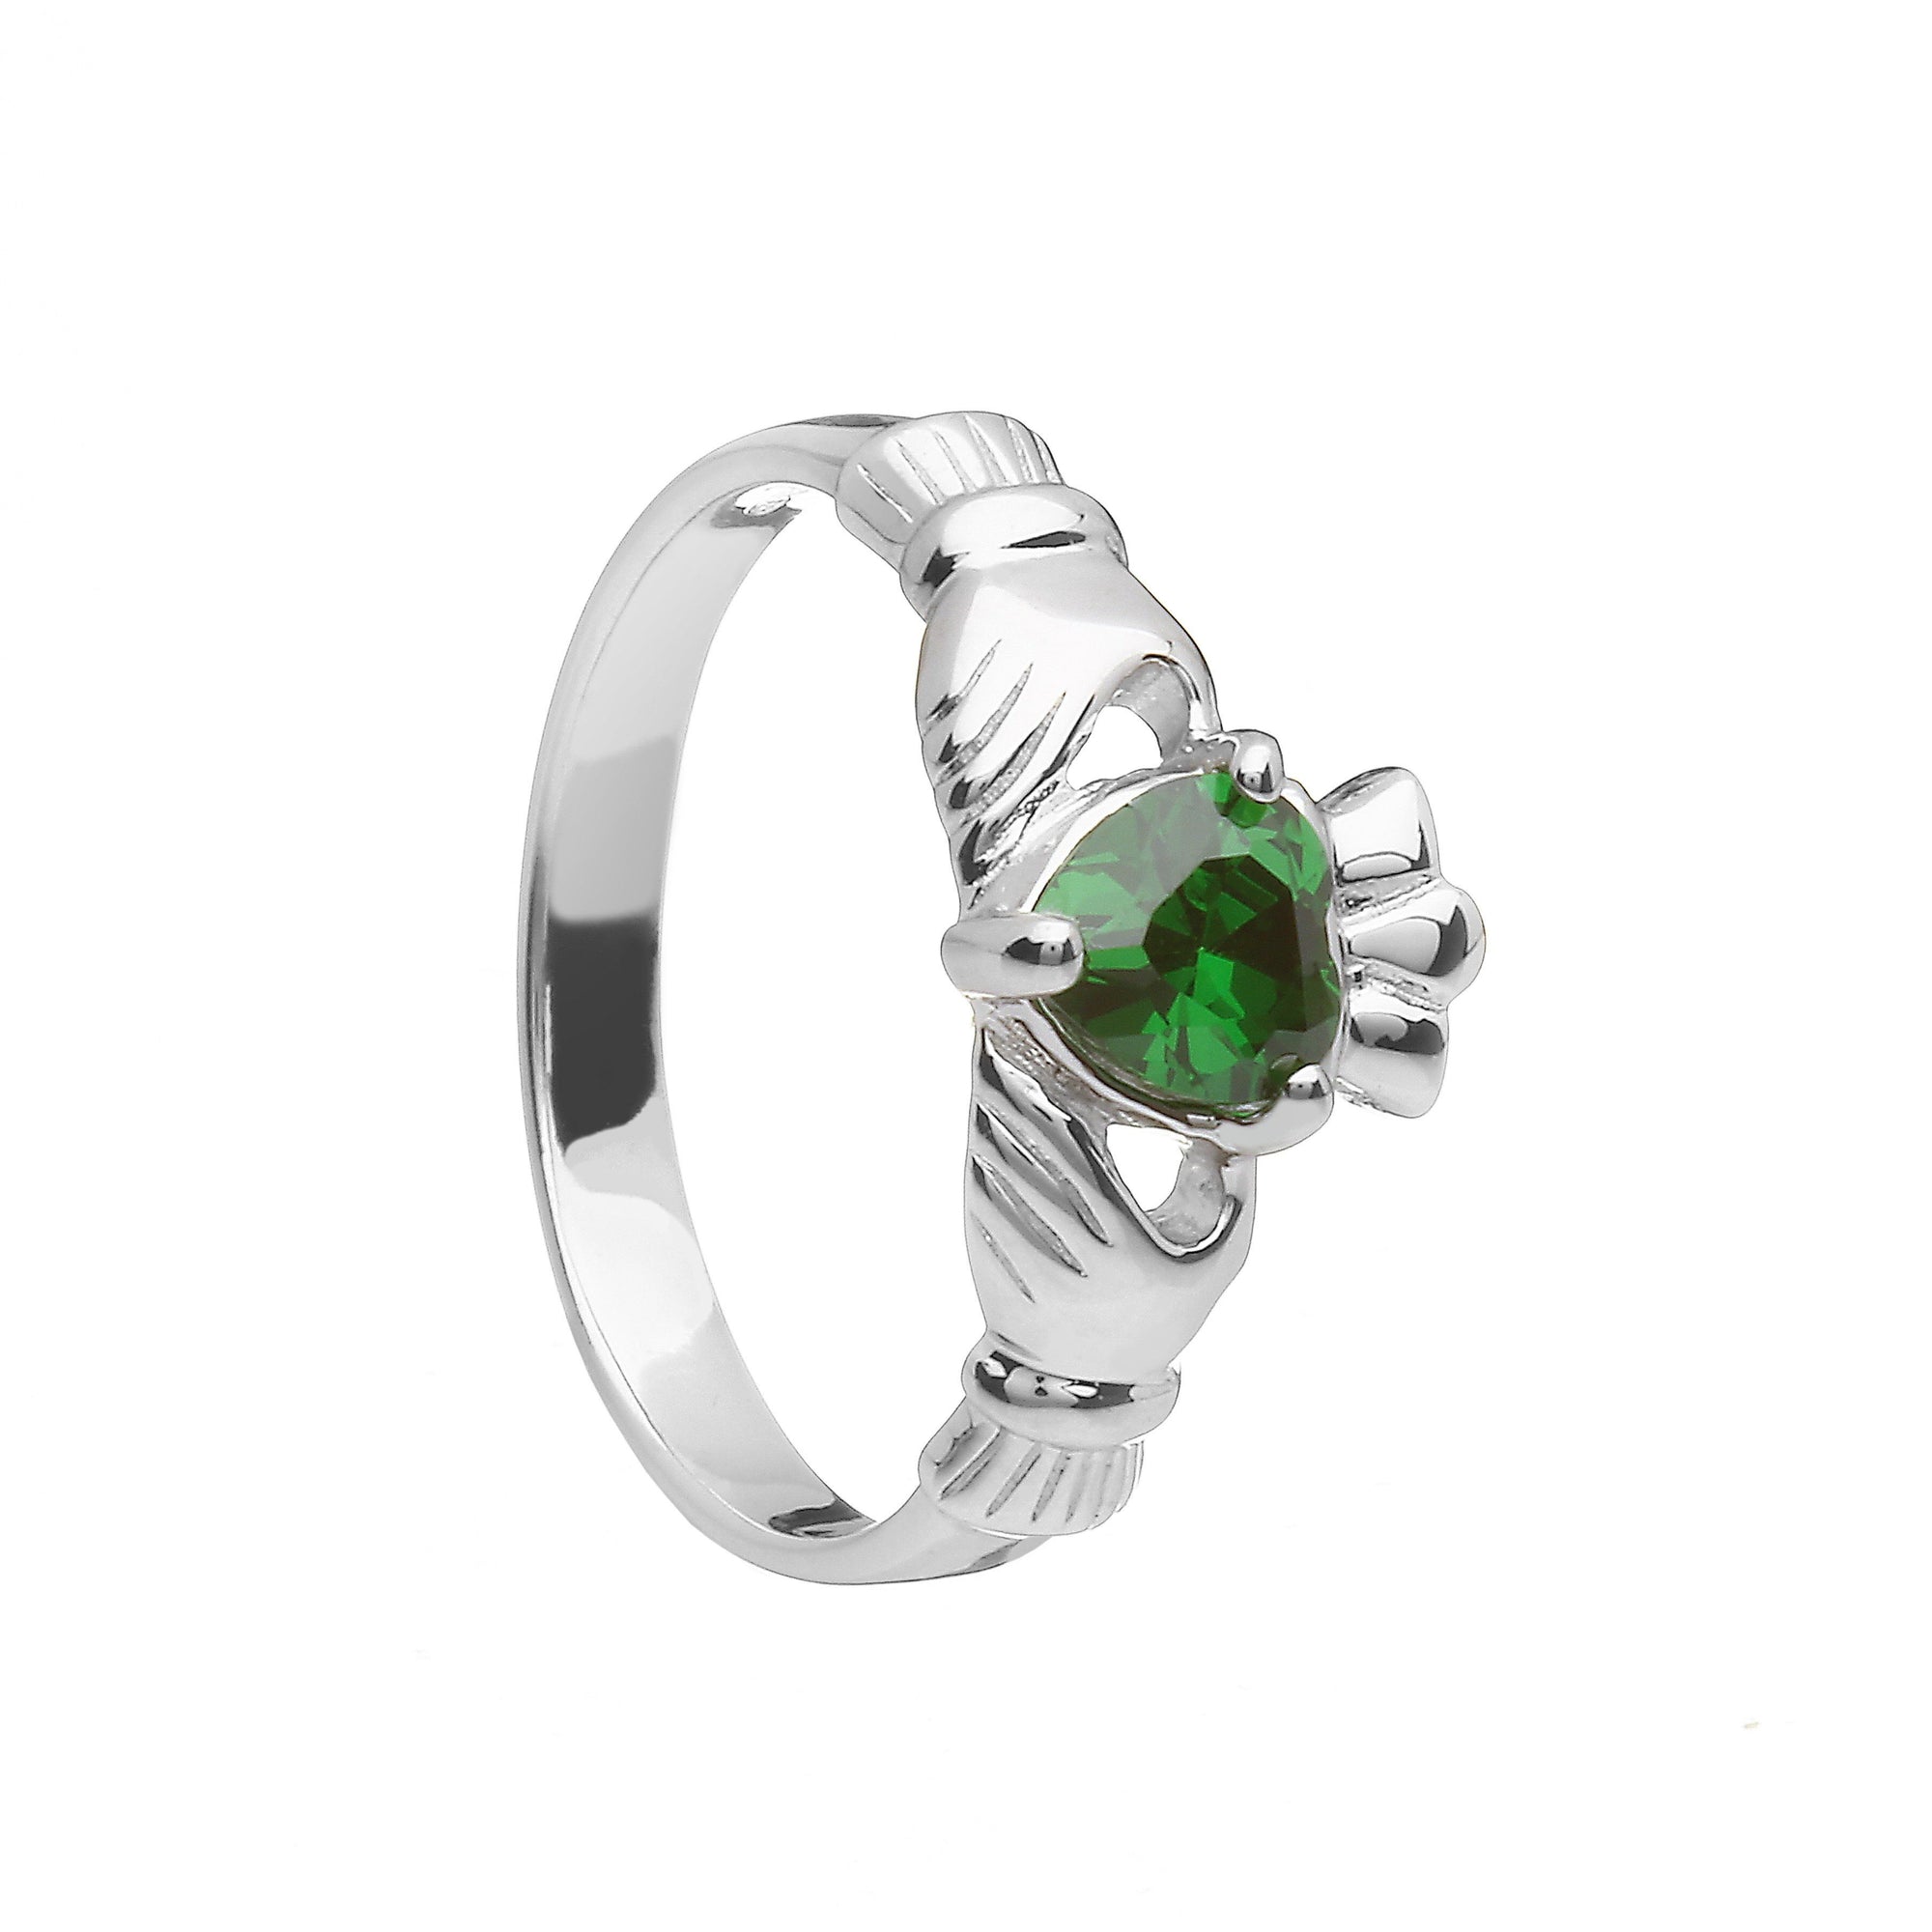 Sterling silver birthstone ring Sterling silver claddagh birthstone ring Aces Jewellers 